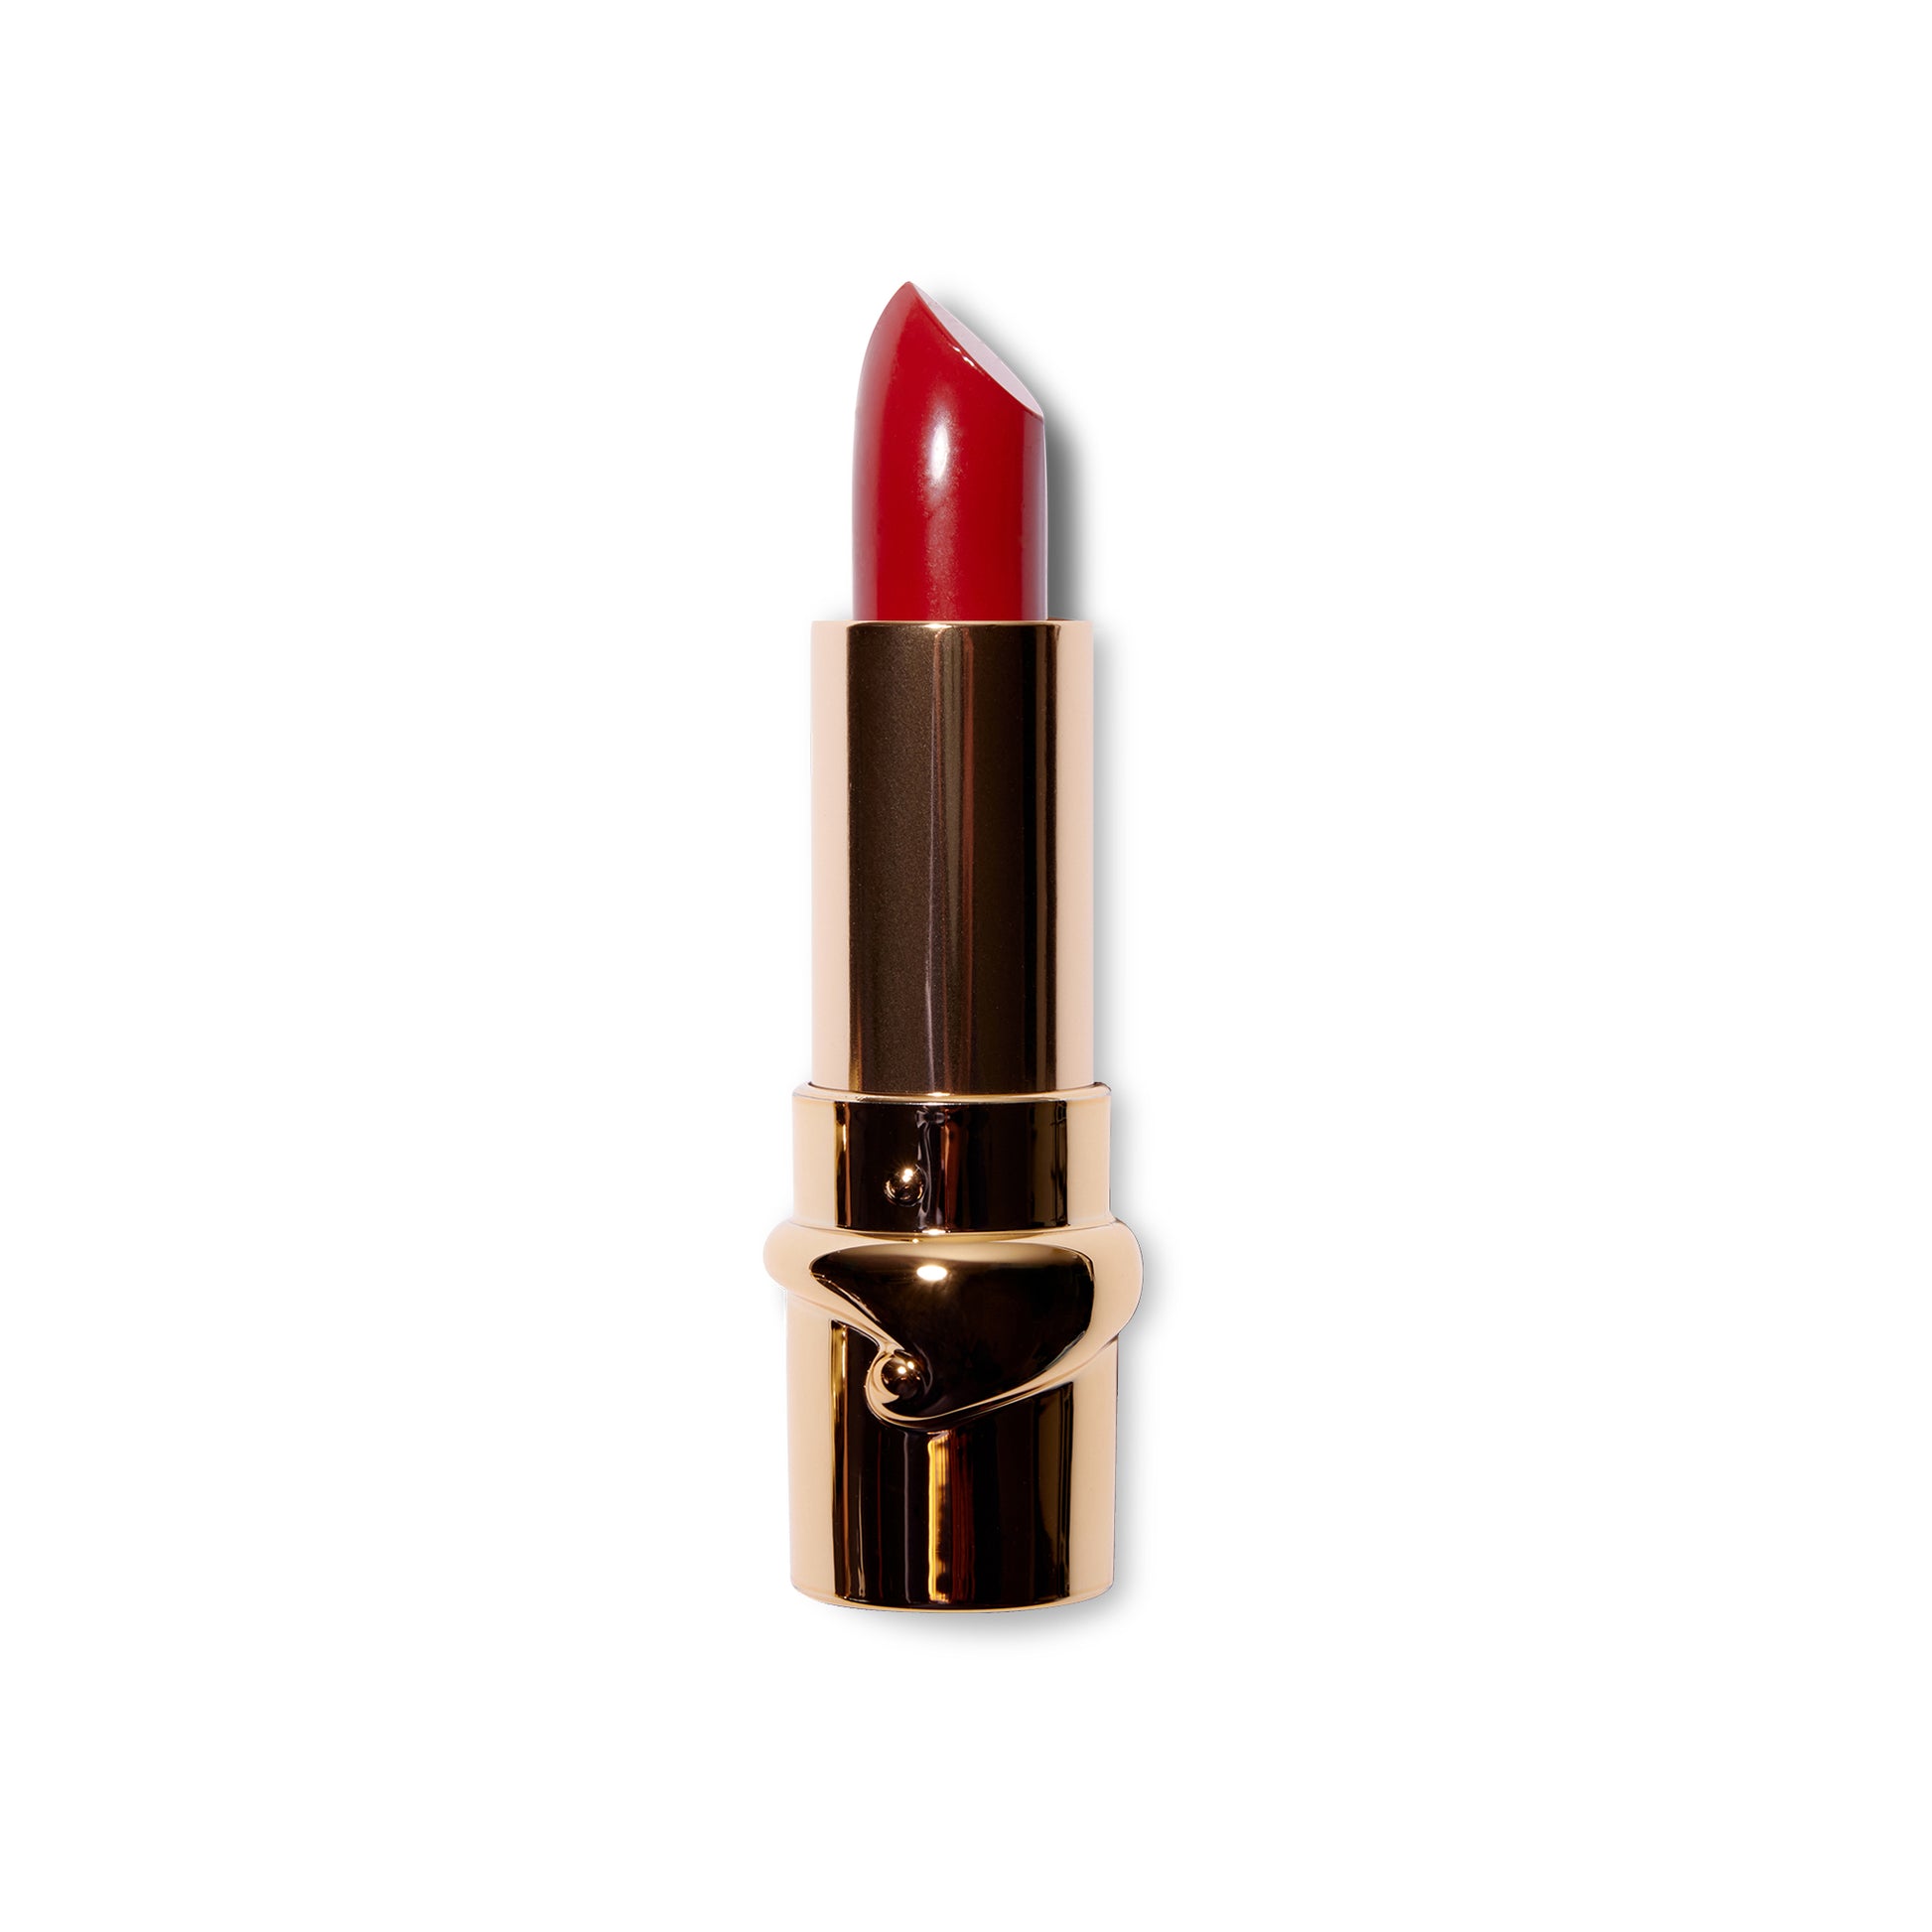 The Julie Hewlett matte Noir lipstick in Coco is wound up and the bullet is visible in the gold component. 